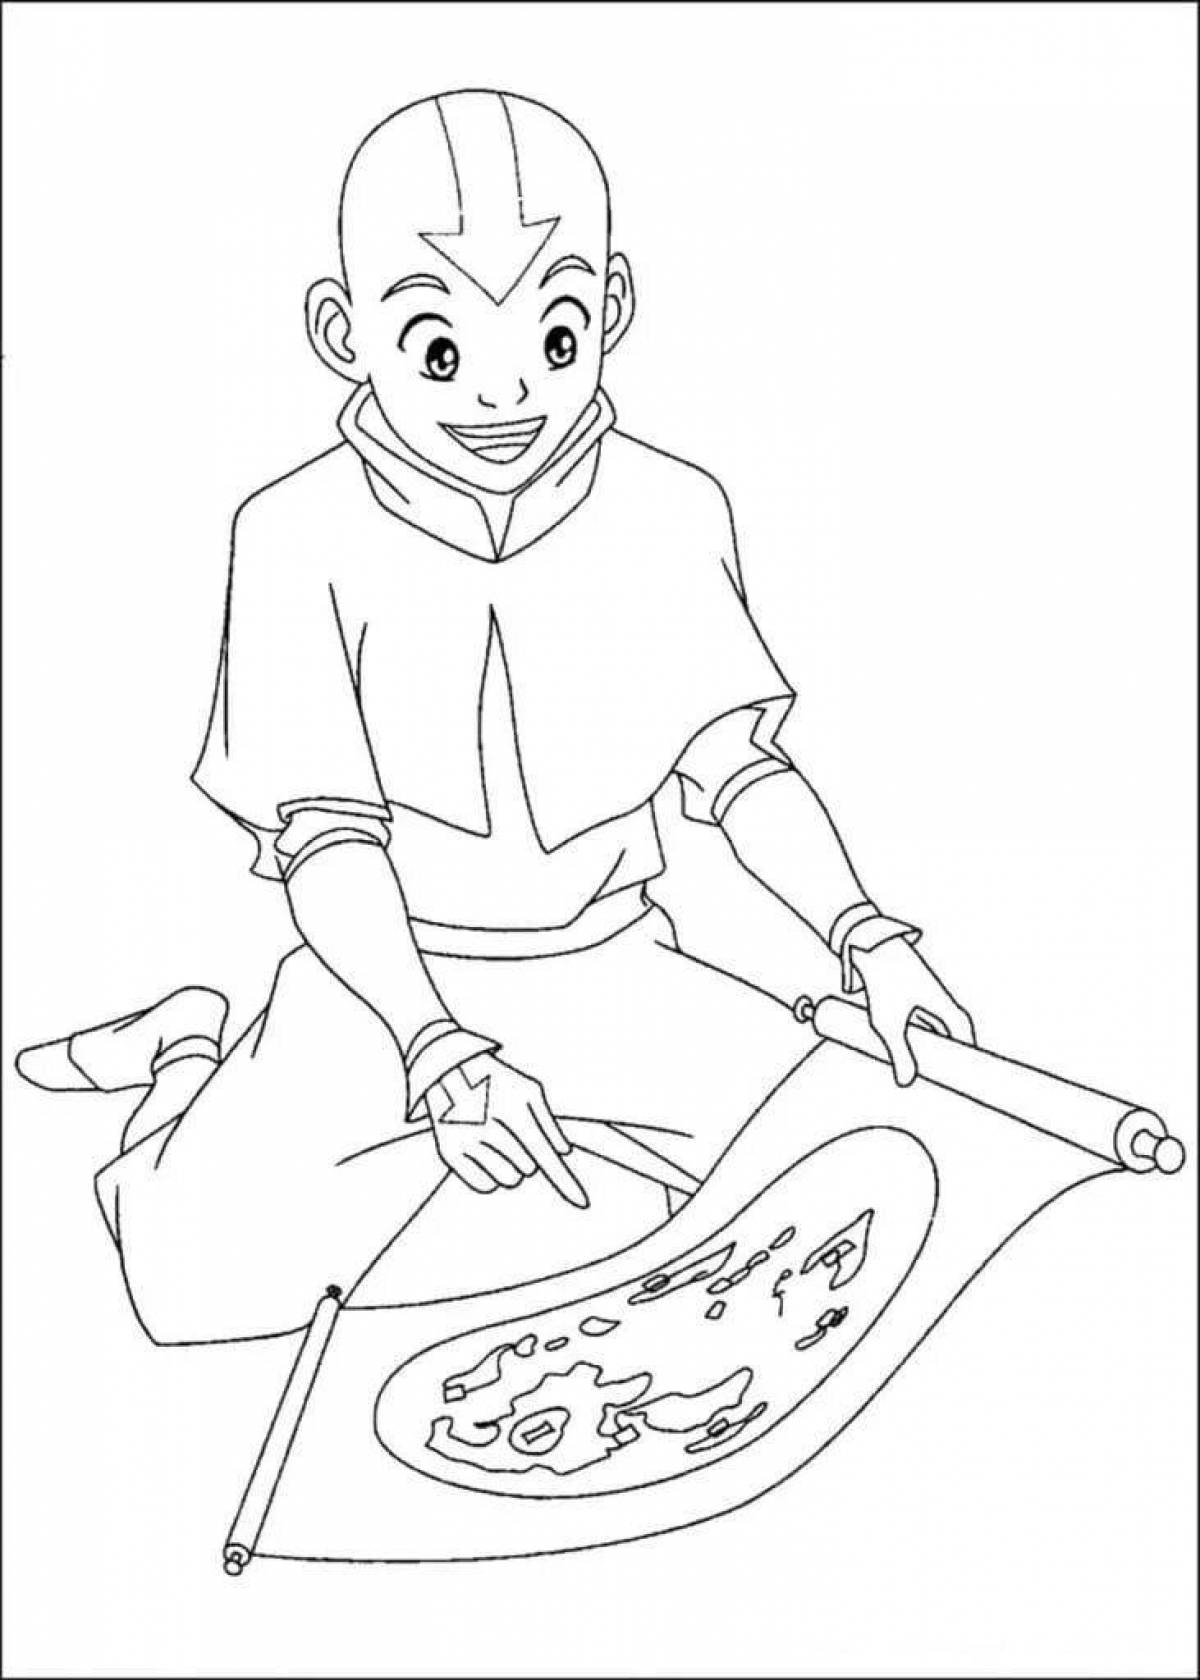 Aang's glowing avatar coloring page